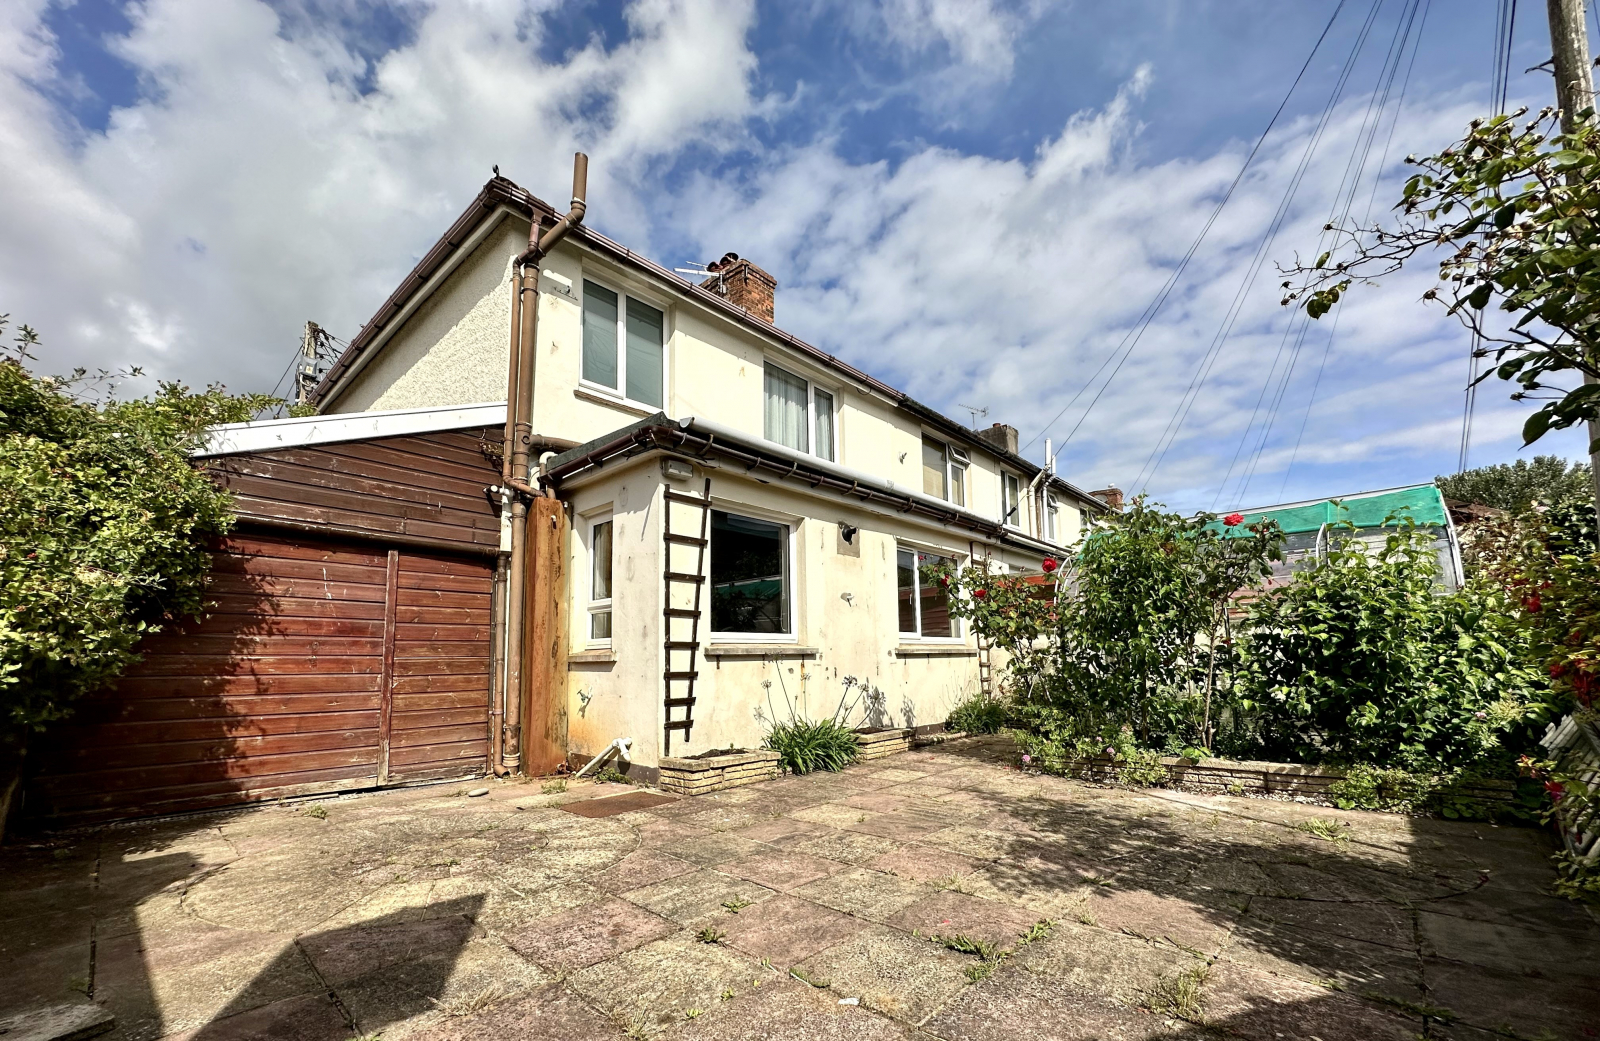 3 bed end of terrace house for sale in Newport, Devon  - Property Image 1